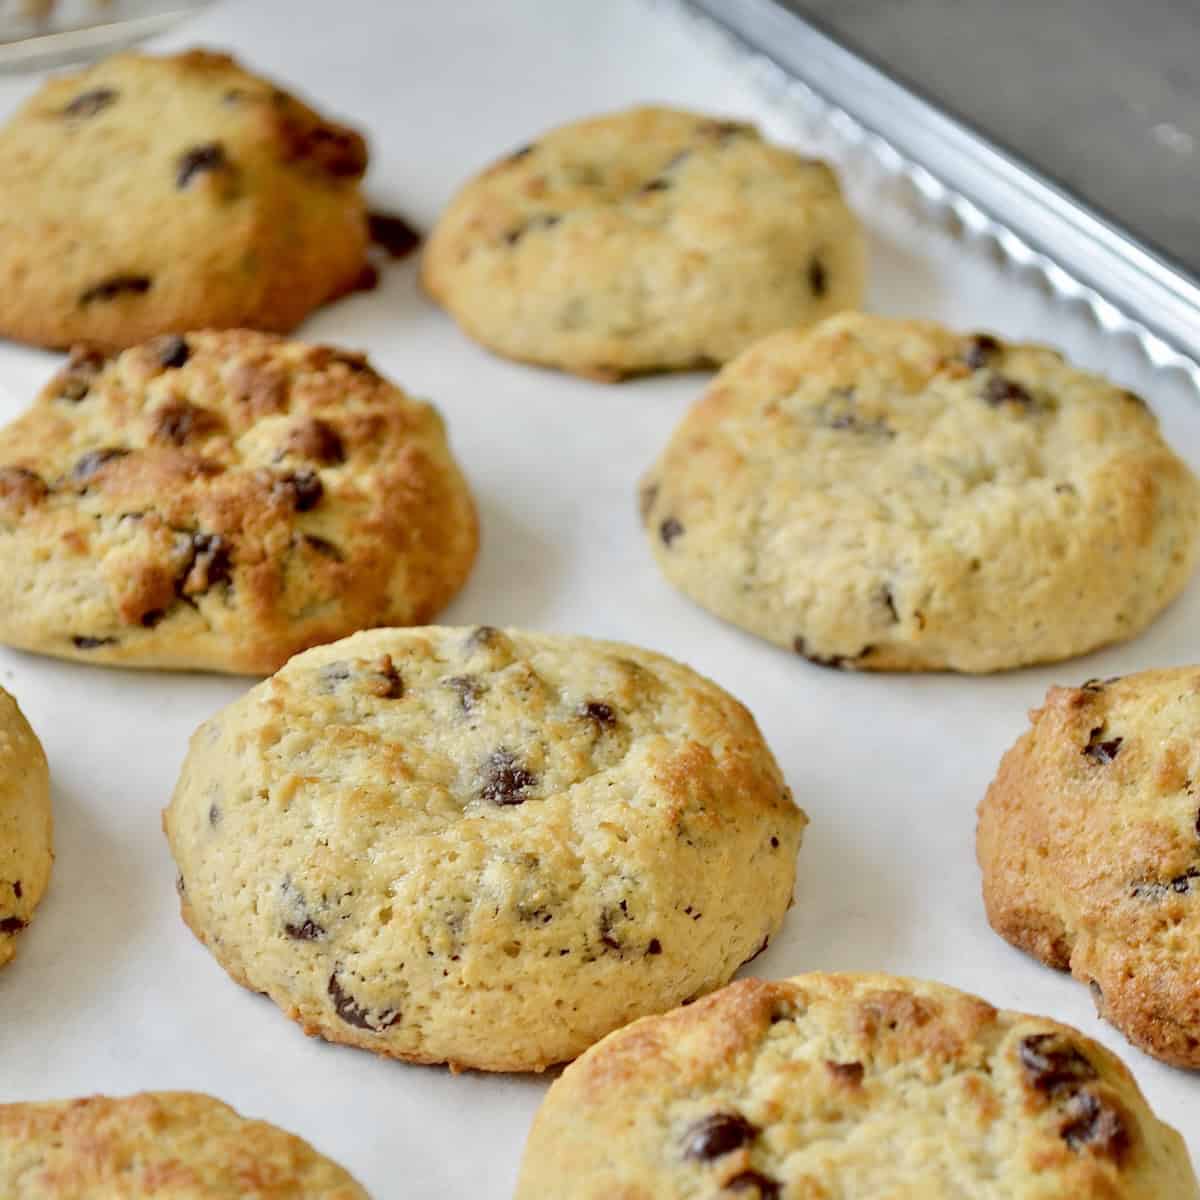 Baked golden brown chocolate chip cookies